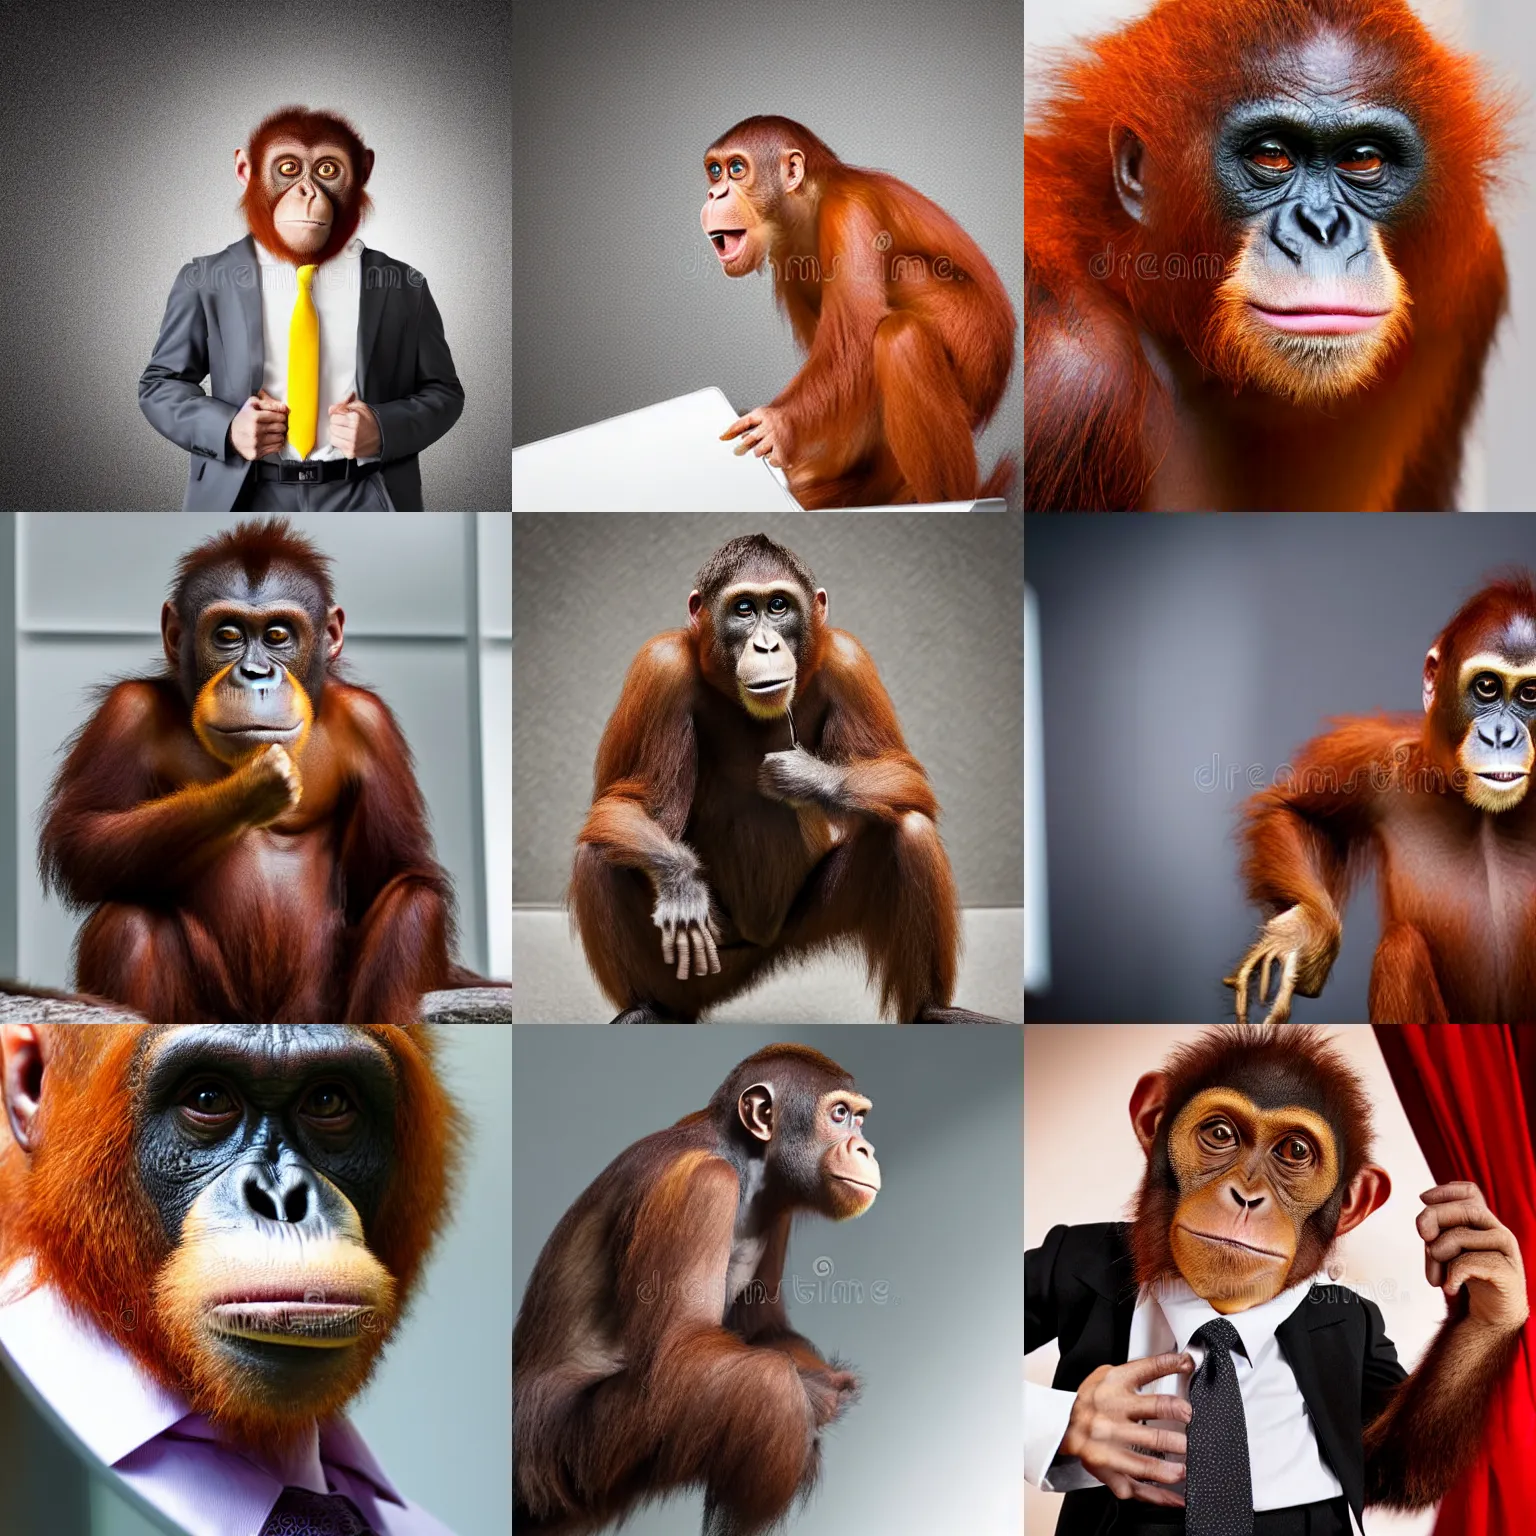 Prompt: business monkey in a business suit orangutan, wearing a suit, standing in front of a mirror, angry at mirror, photograph 5 5 mm zeiss f / 4 award winning photograph stock photo